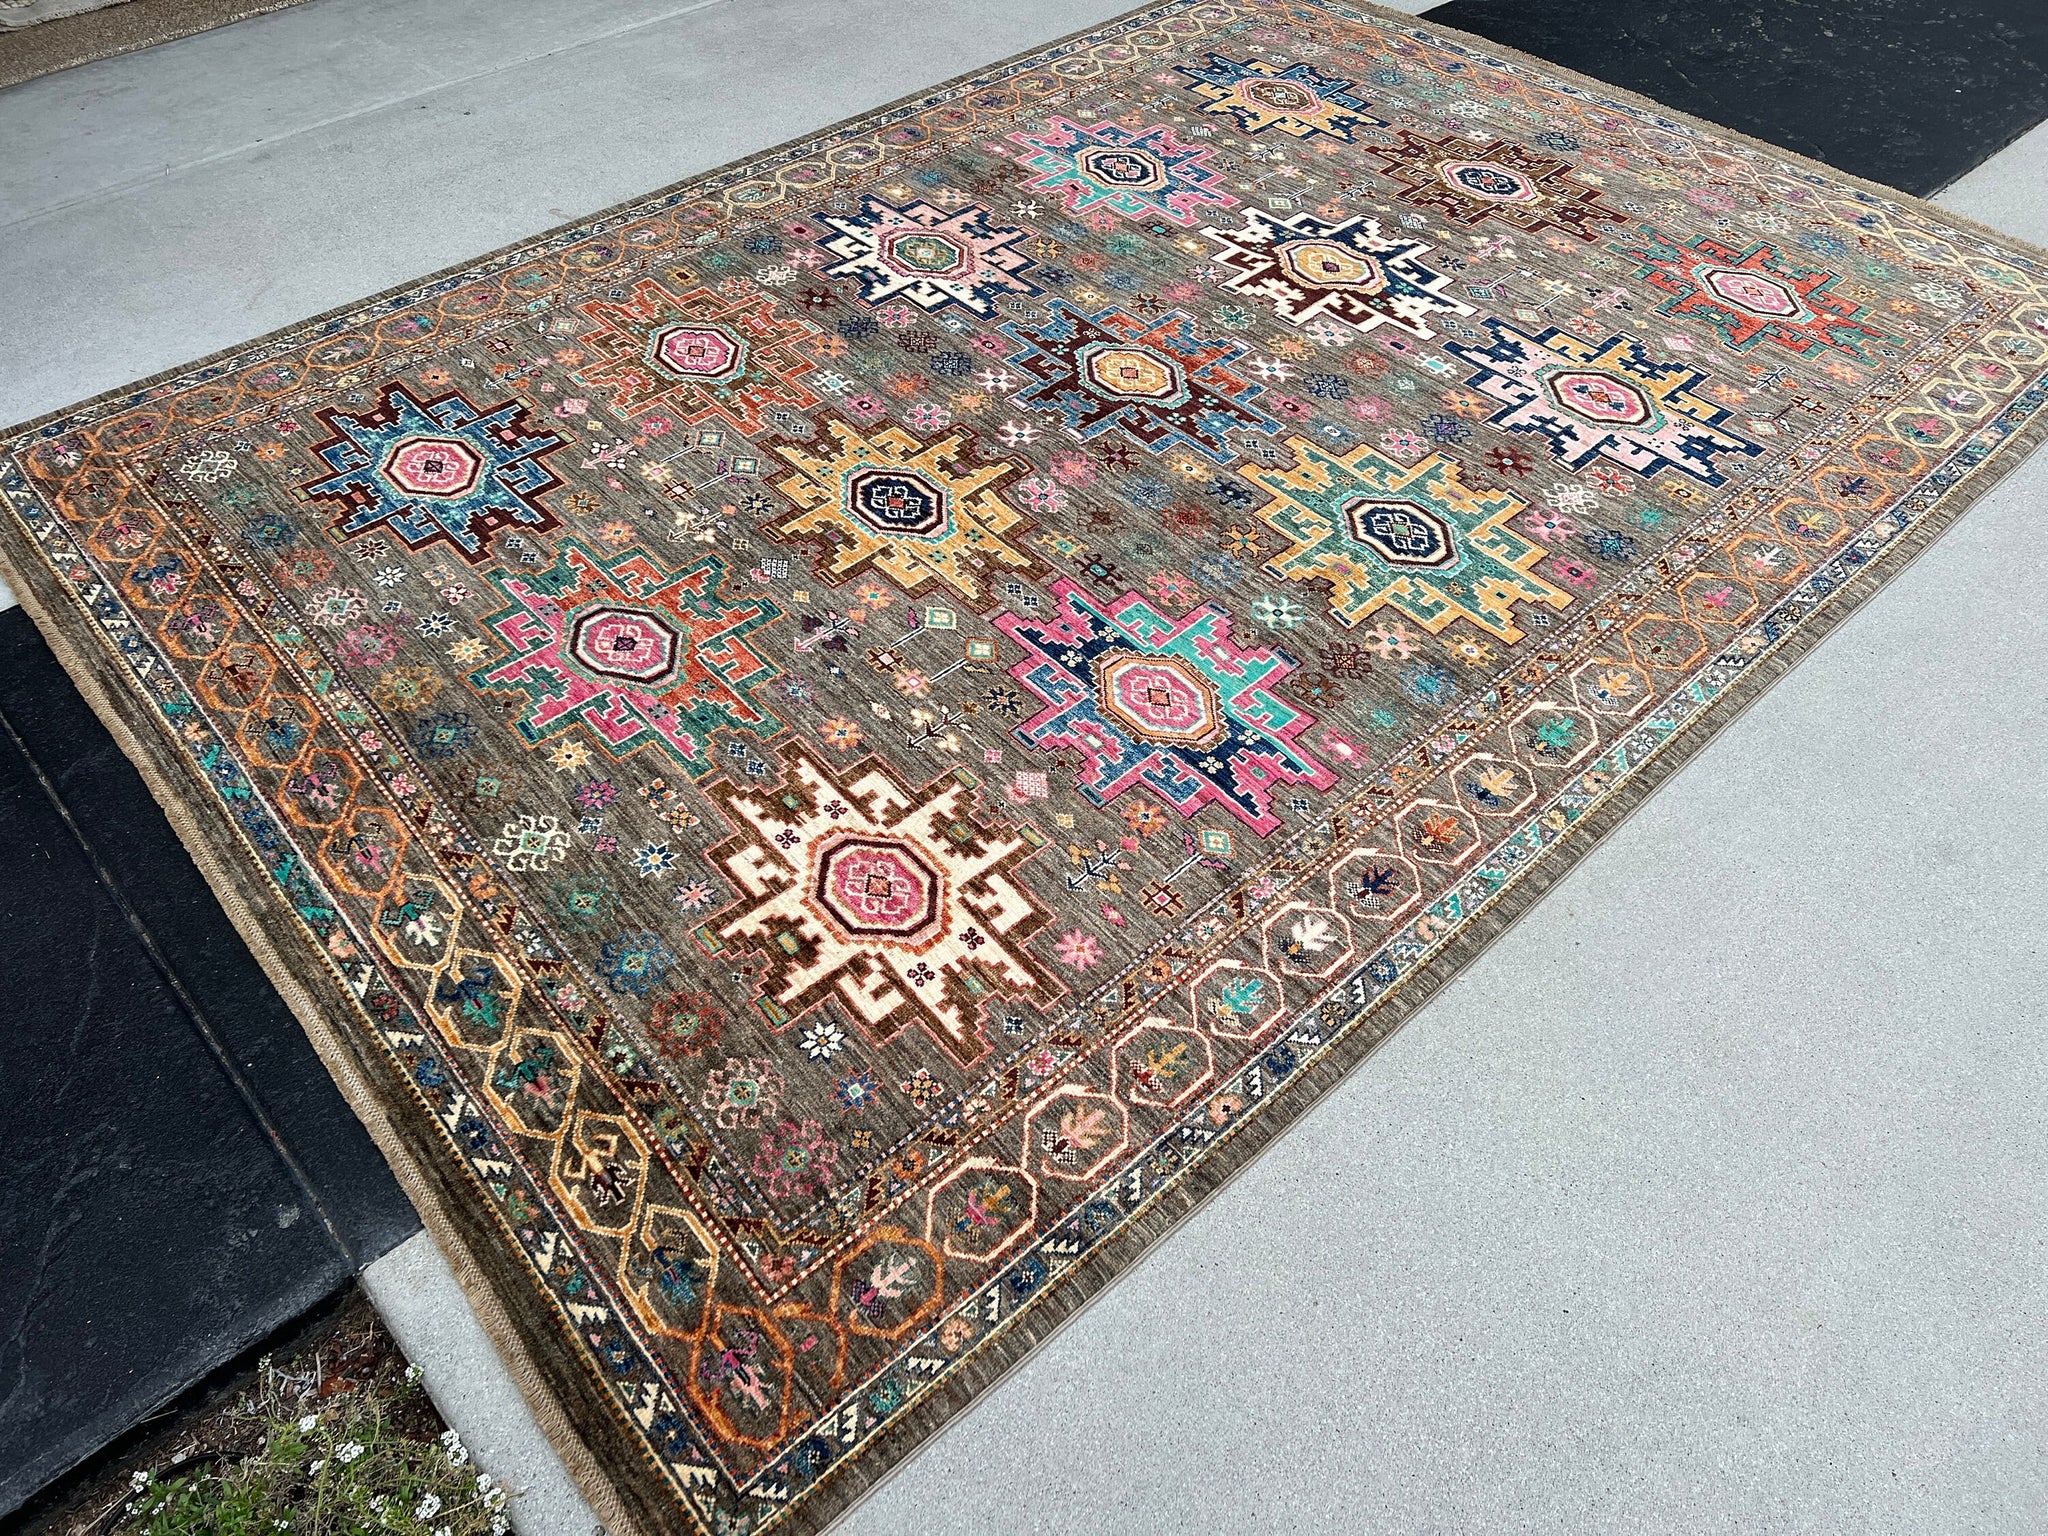 7x10 (215x305) Handmade Afghan Rug | Charcoal Grey Navy Blue Teal Turquoise Caramel Gold Pink Ivory Brown | Wool Hand Knotted Woven Tribal